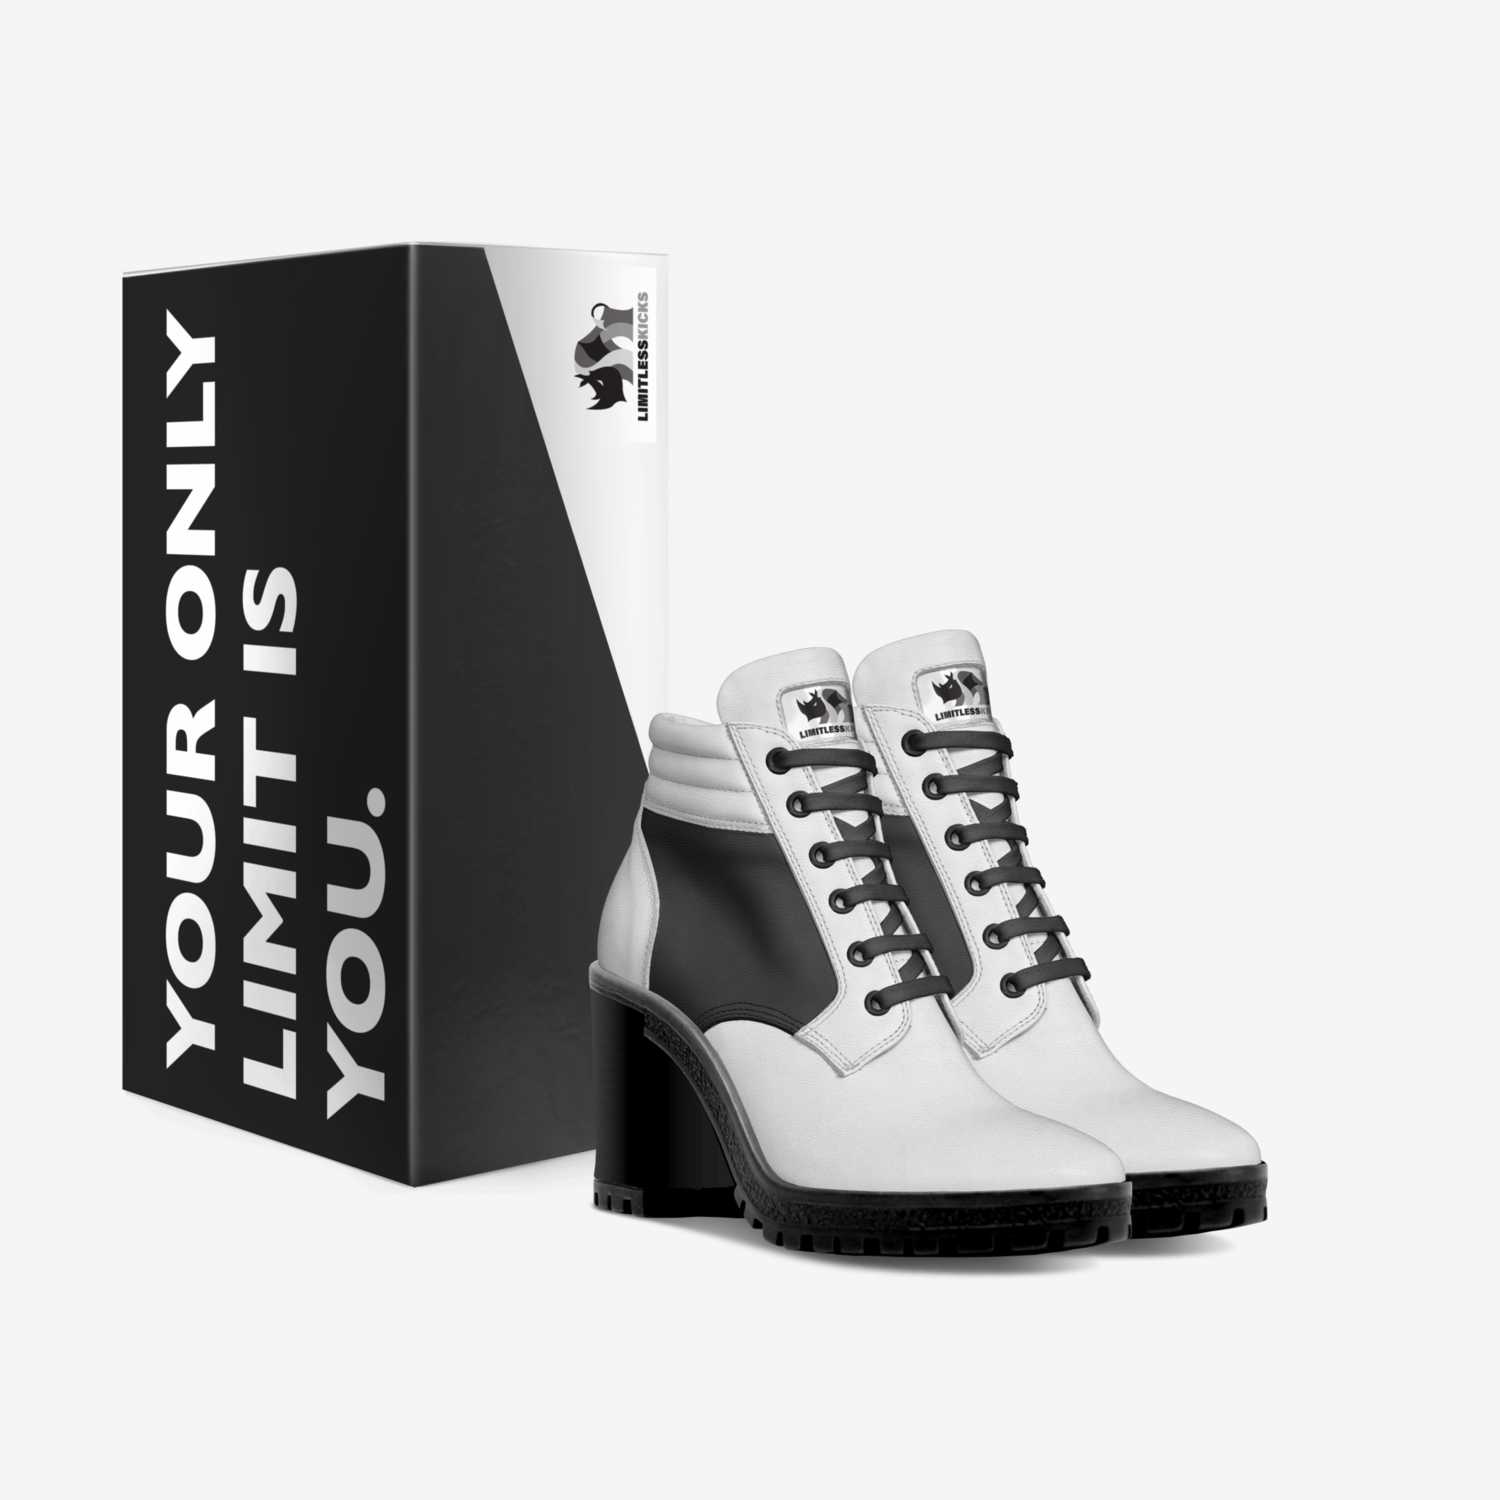 Limitless Ladies 2 custom made in Italy shoes by Limitless Kicks | Box view